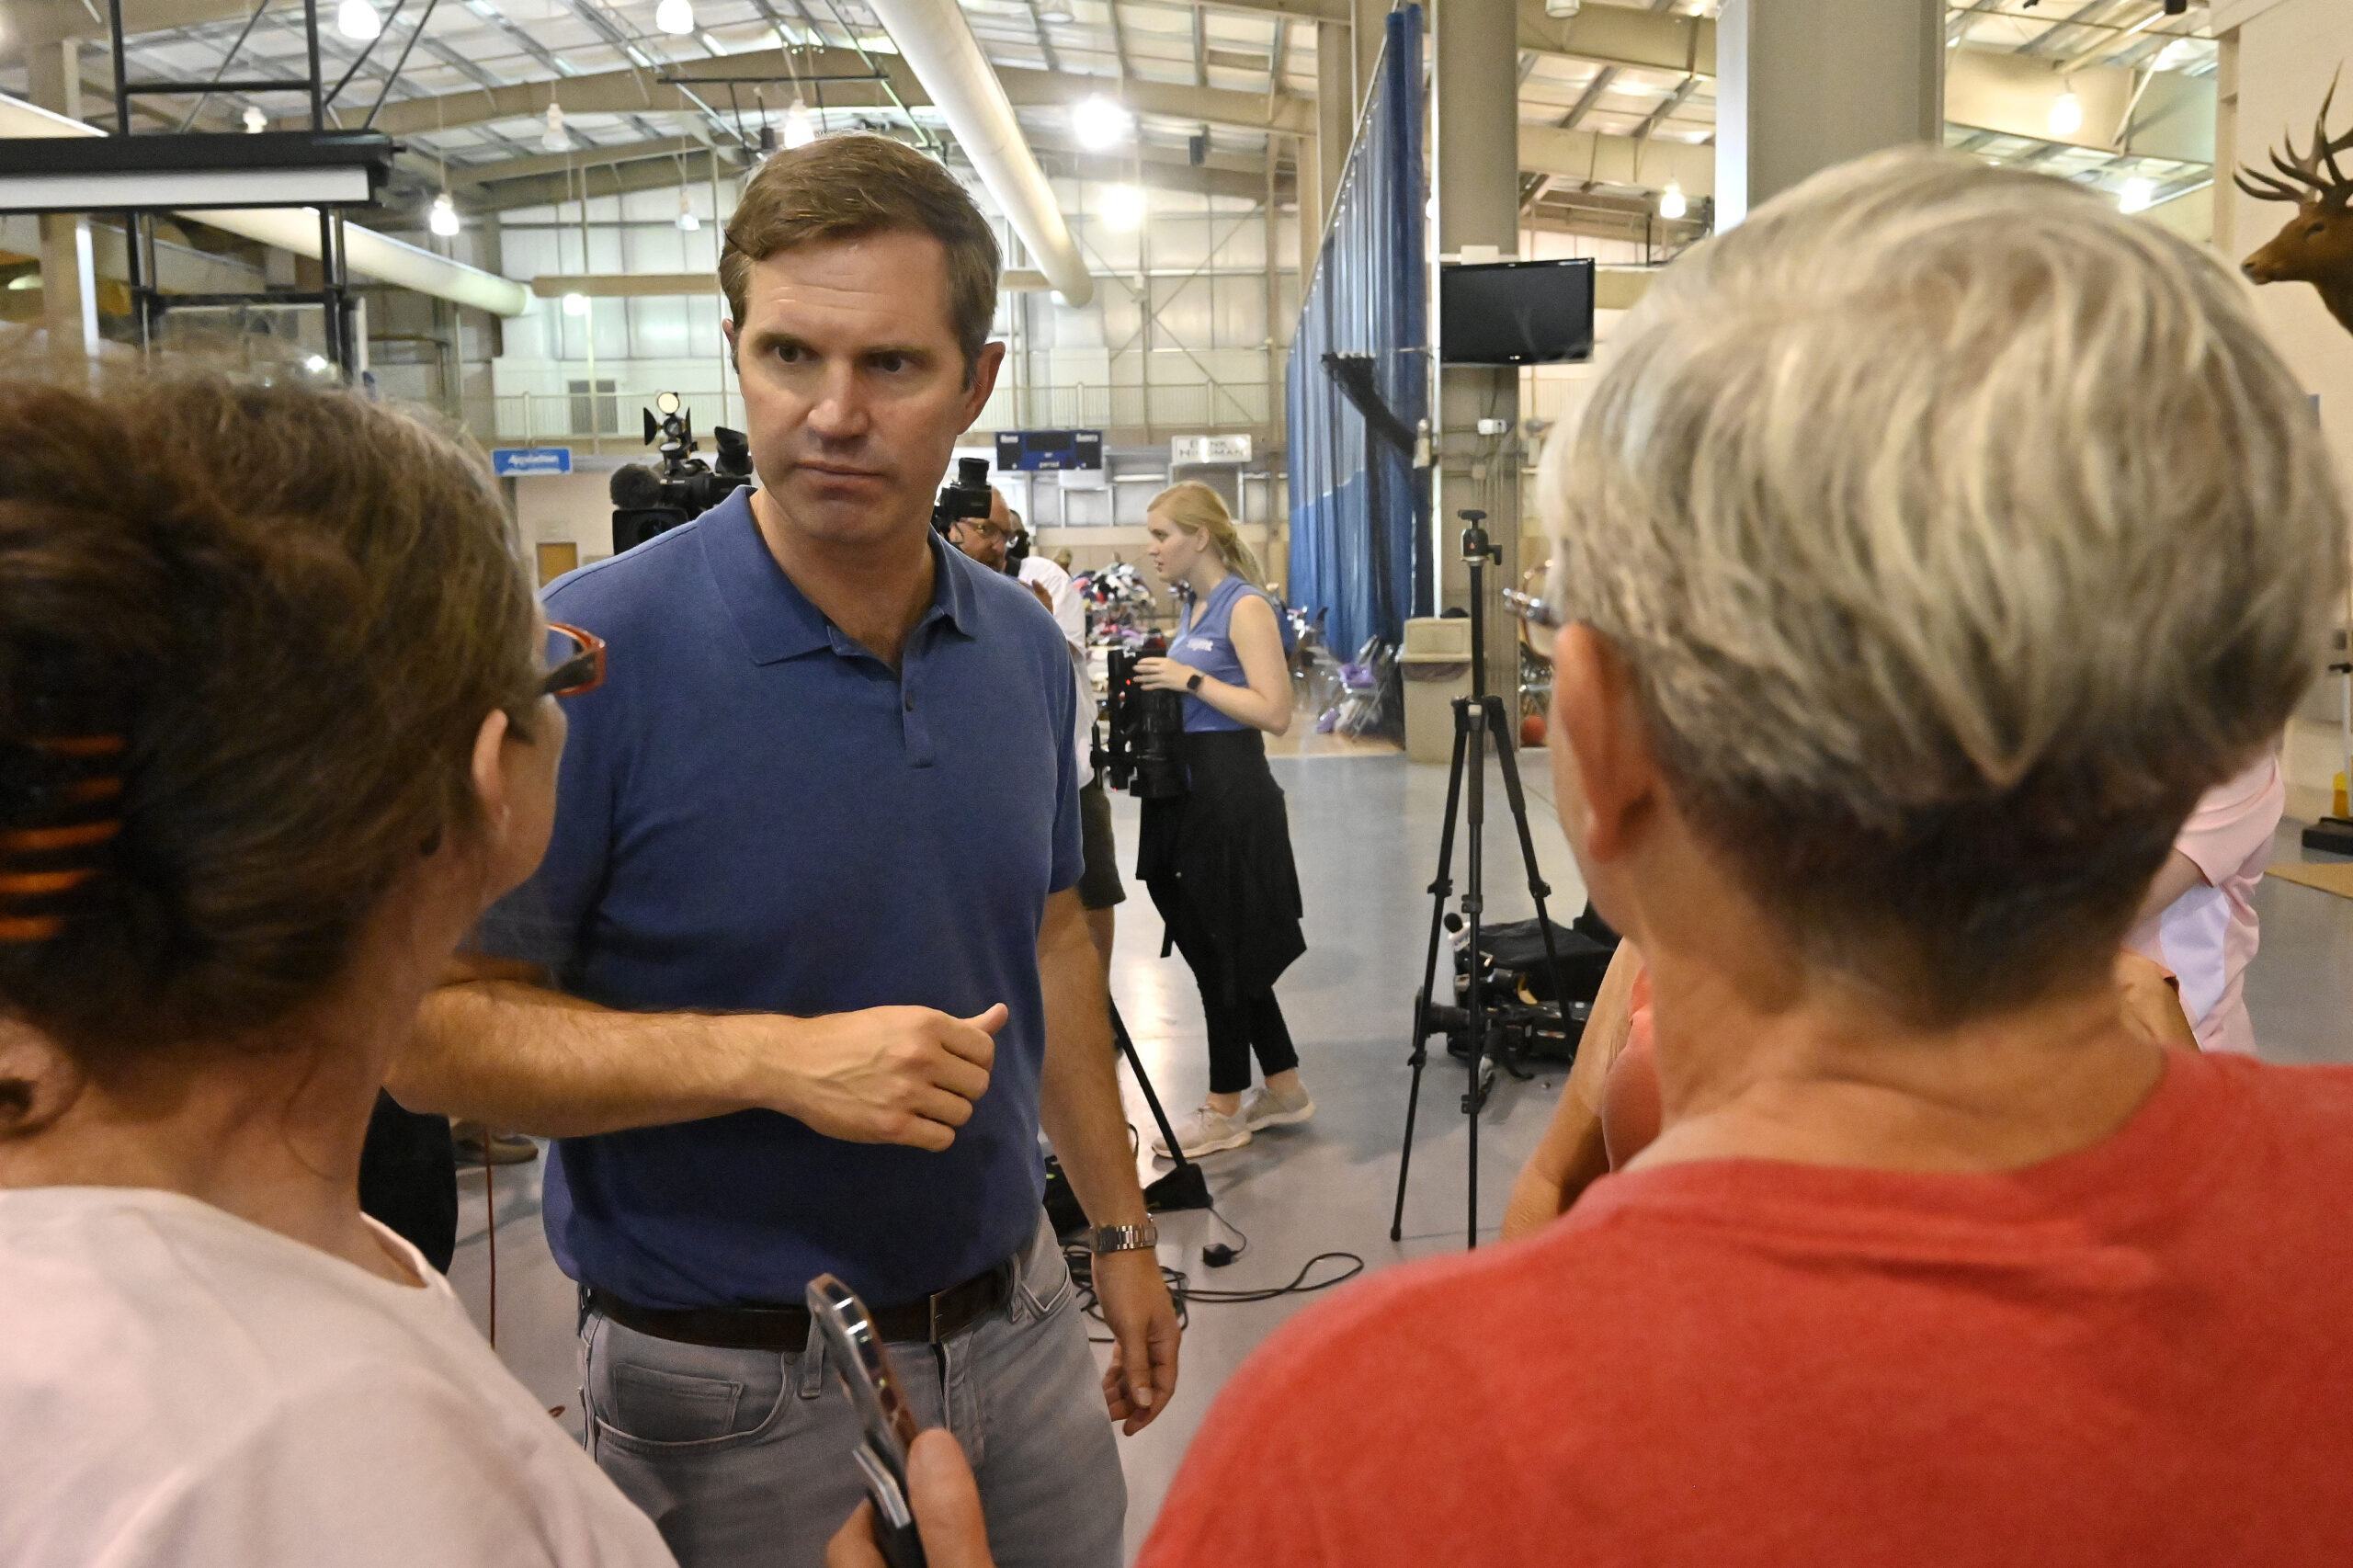 Kentucky Governor Andy Beshear, center, answers question from residents of Knott County Ky., that have been displaced by floodwaters at the Knott County Sportsplex in Leburn, Ky., Sunday, July 31, 2022. (AP Photo/Timothy D. Easley)